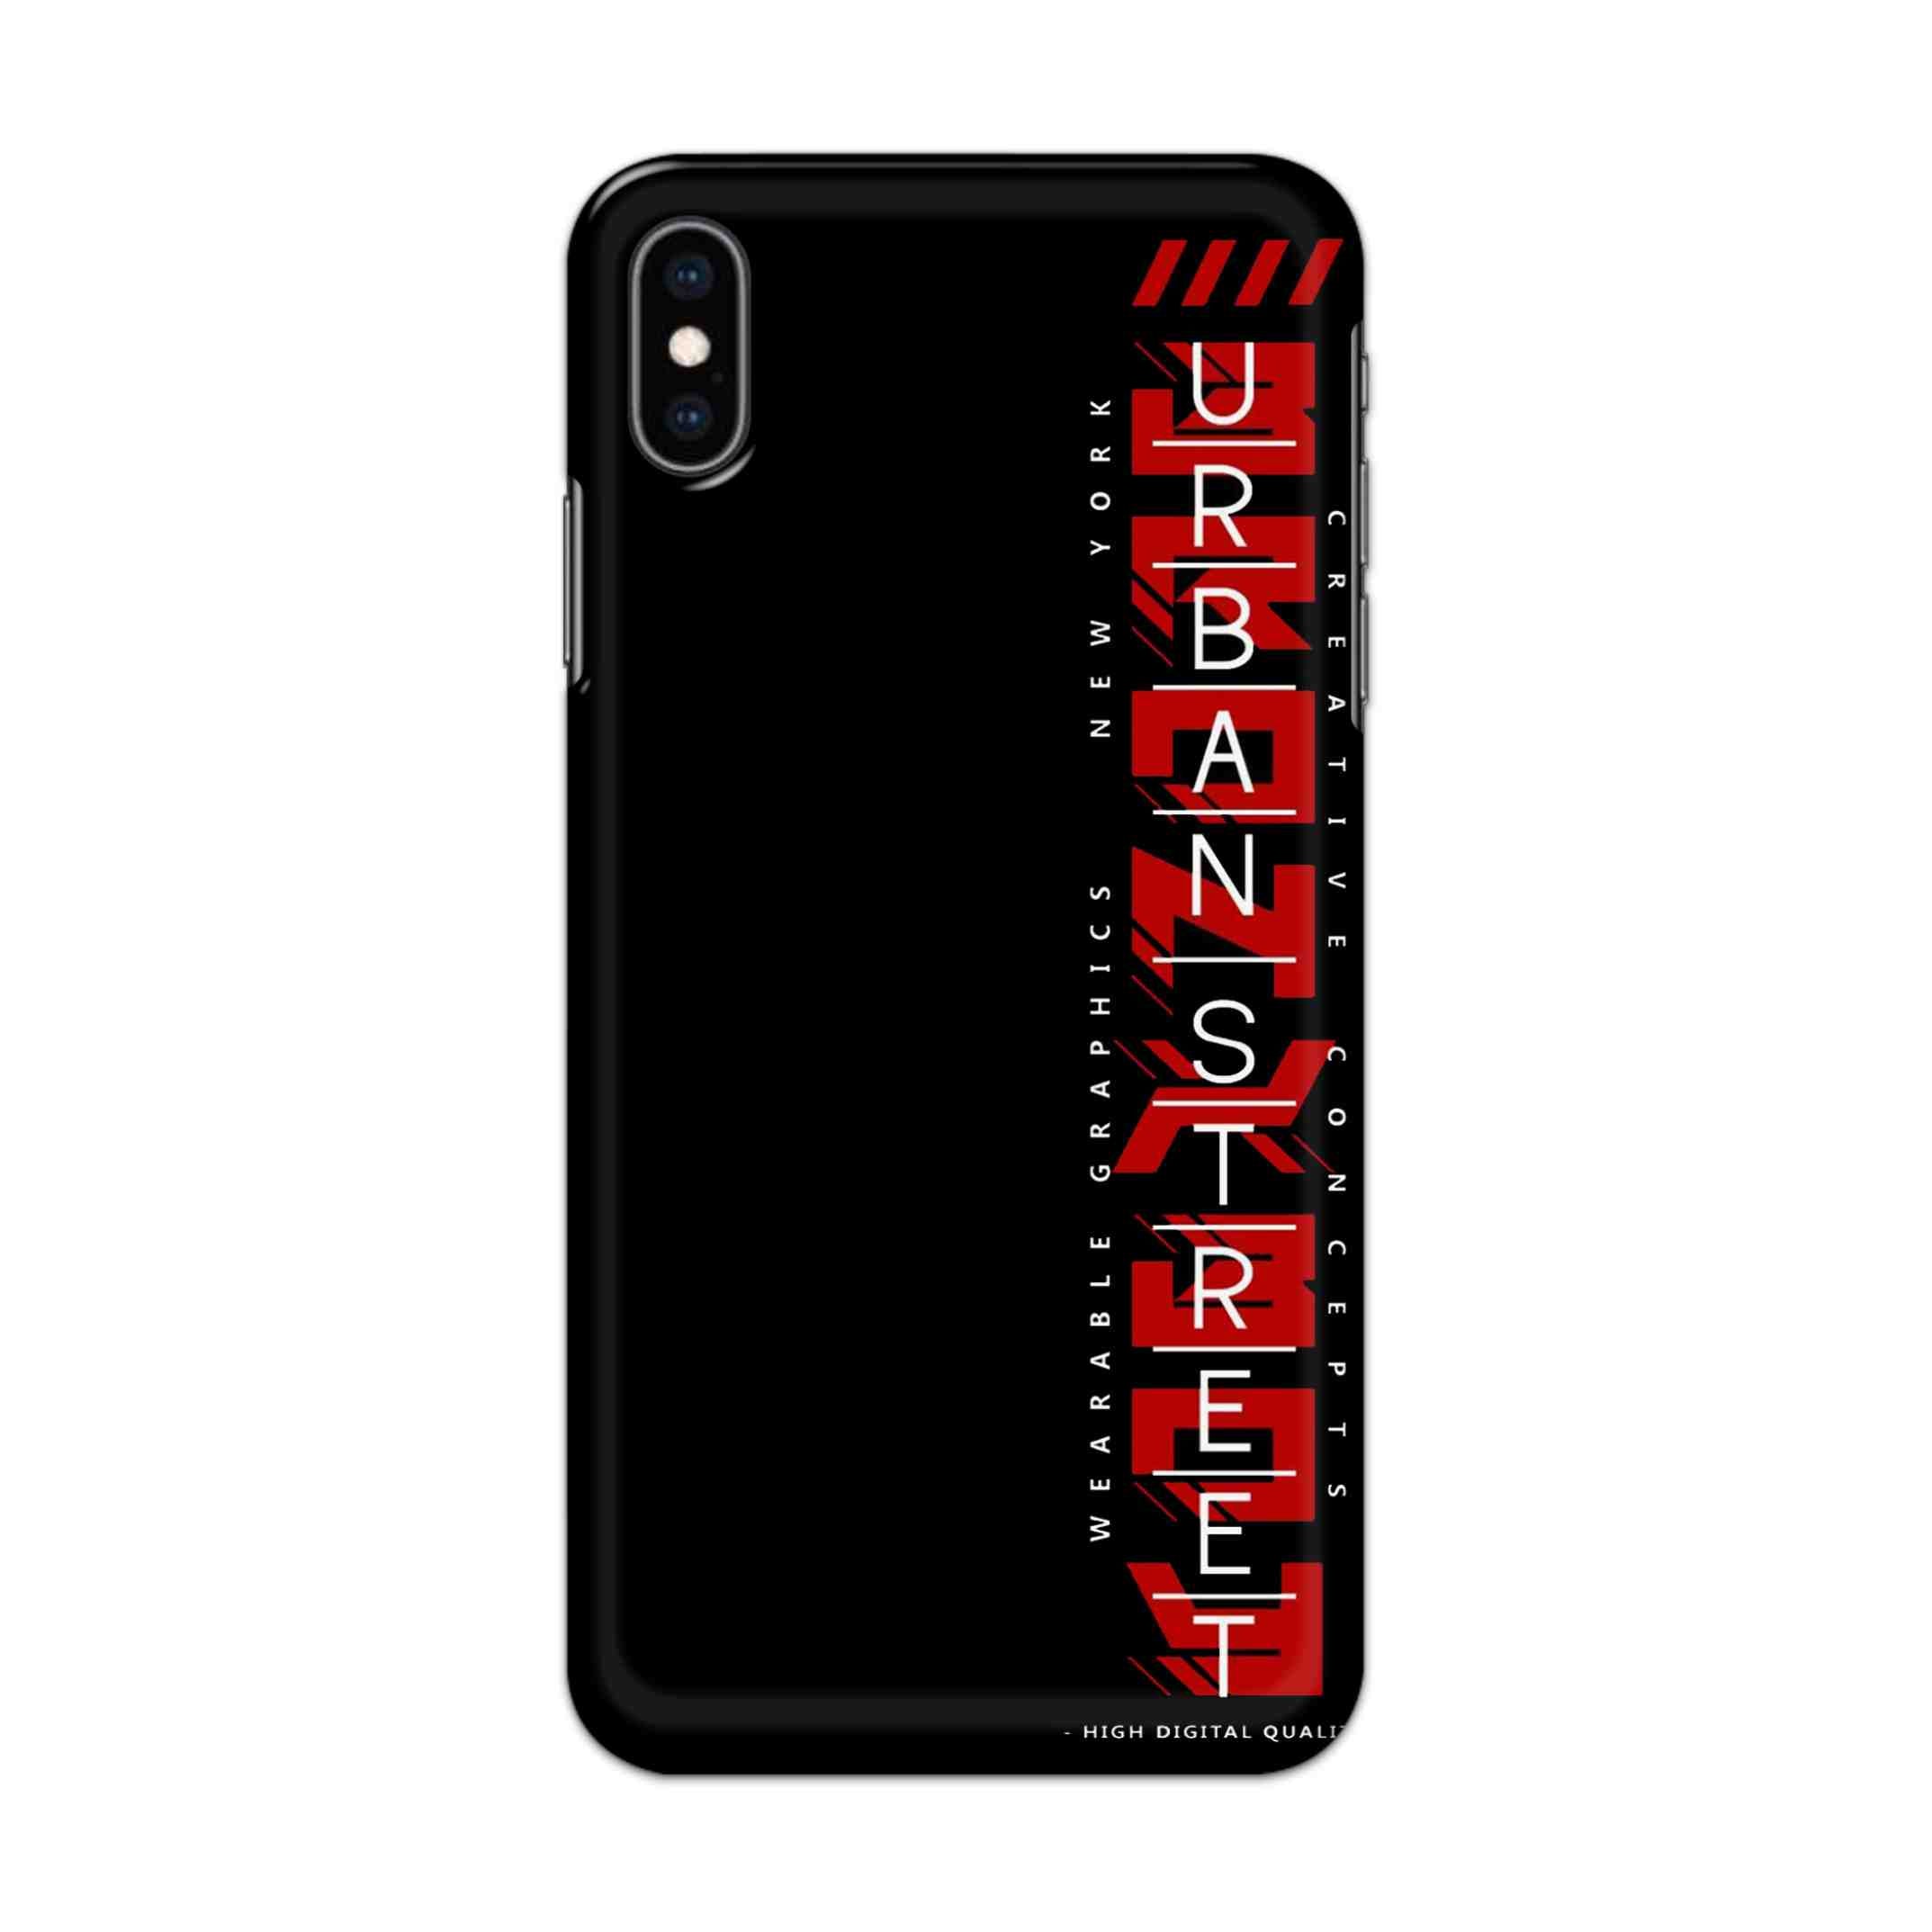 Buy Urban Street Hard Back Mobile Phone Case/Cover For iPhone XS MAX Online